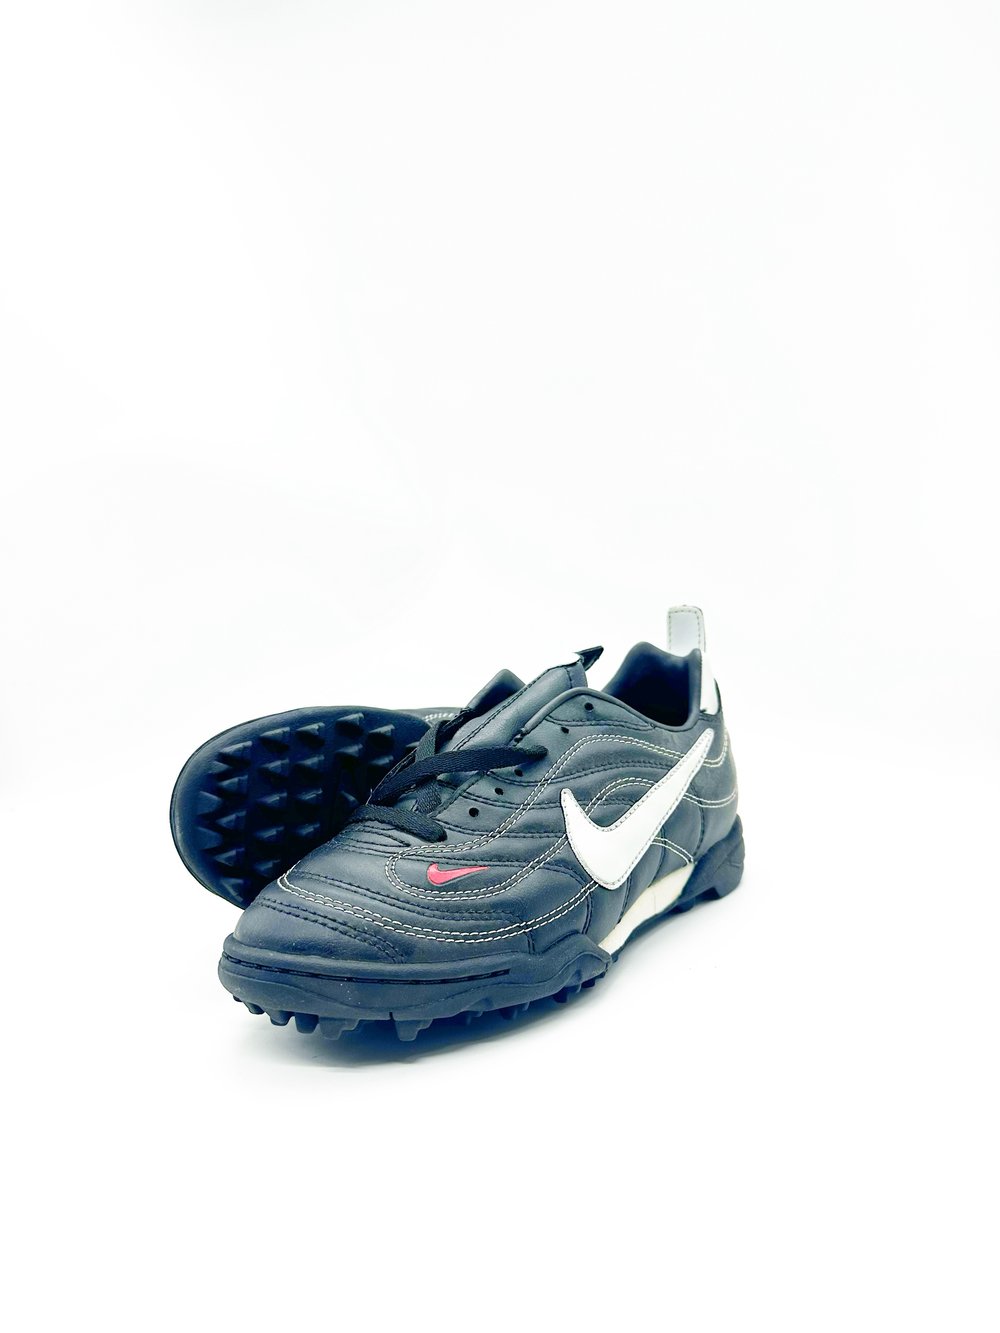 Image of Nike Ultracell R9 TF